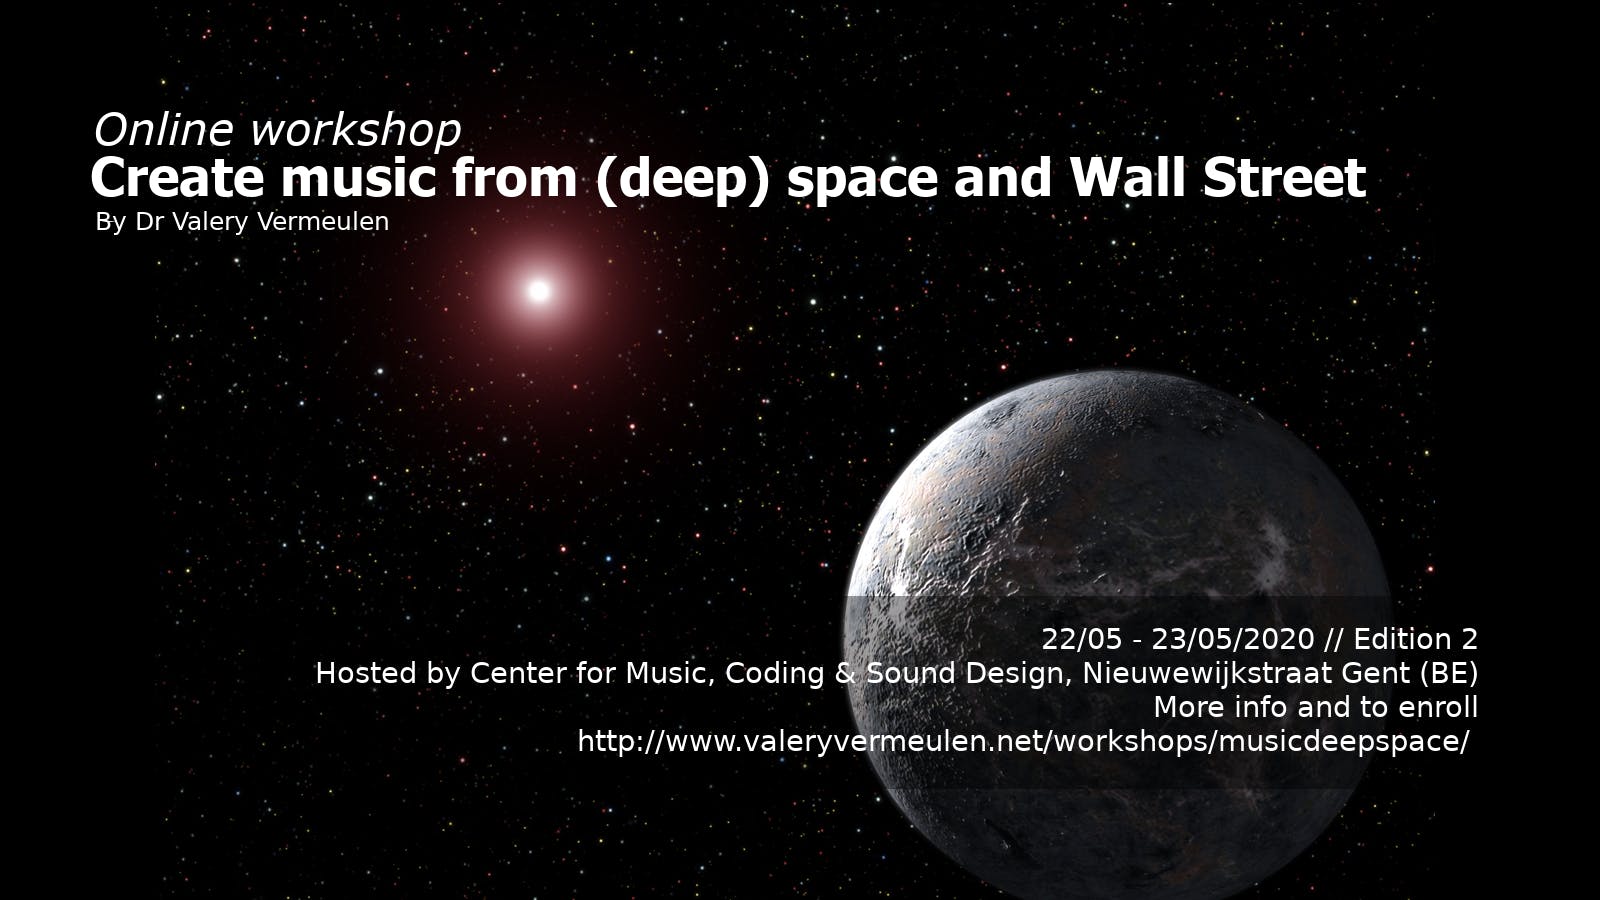 Online workshop "Create music from (deep) space and Wall Street"